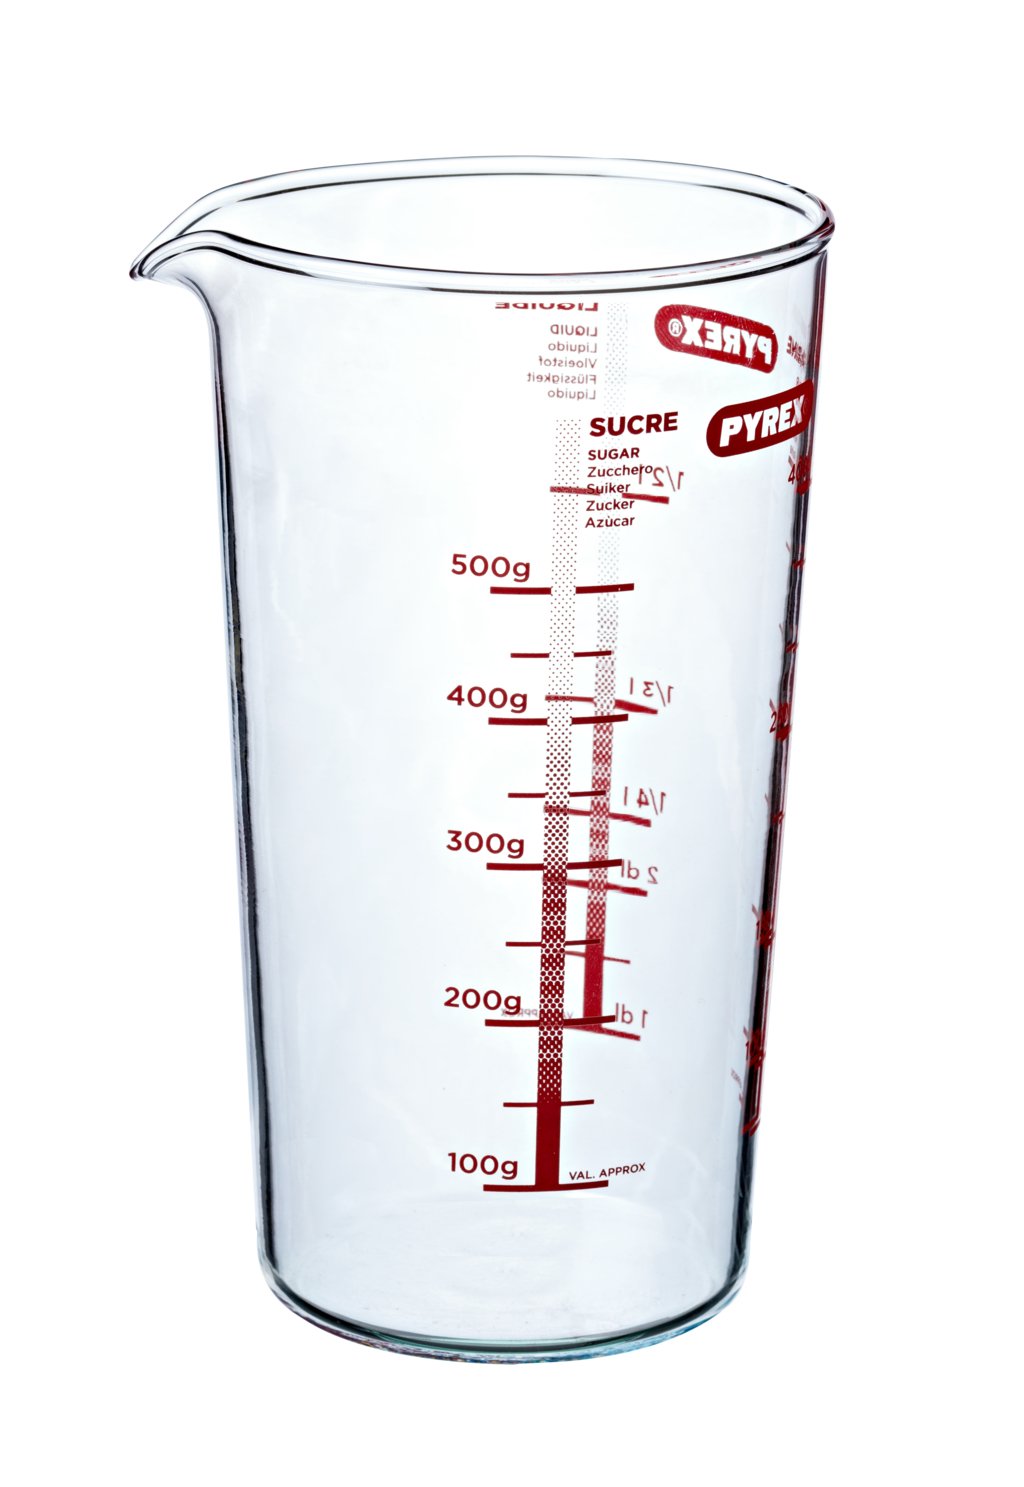 Pyrex Glass Measuring Cups for Baking and Cooking